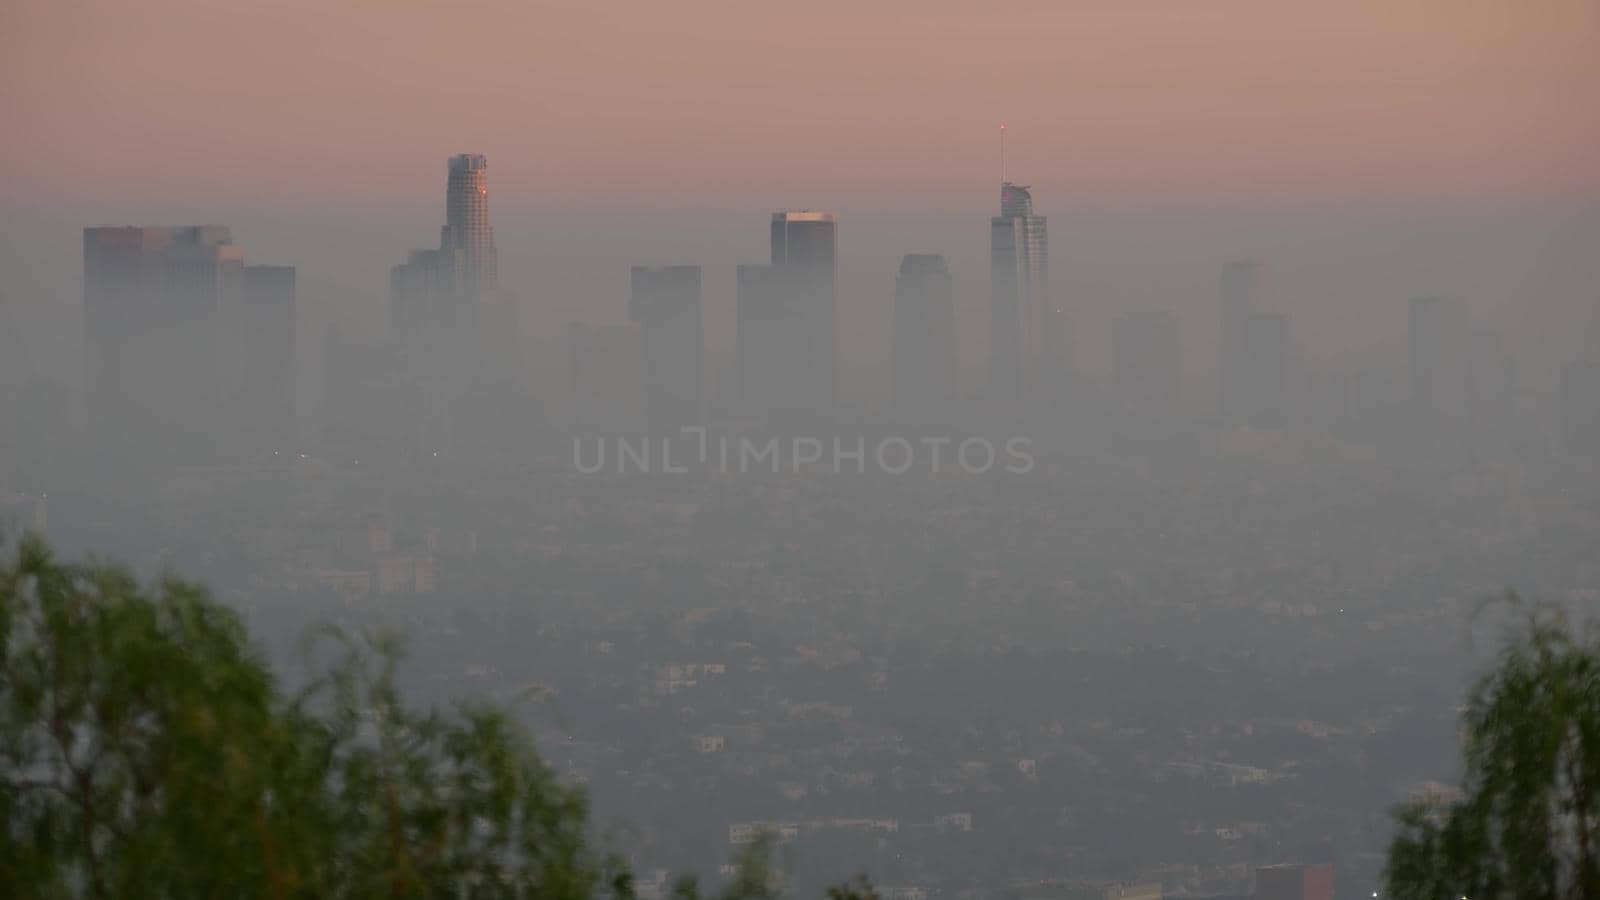 Highrise skyscrapers of metropolis in smog, Los Angeles, California USA. Air toxic pollution and misty urban downtown skyline. Cityscape in dirty fog. Low visibility in city with ecology problems.